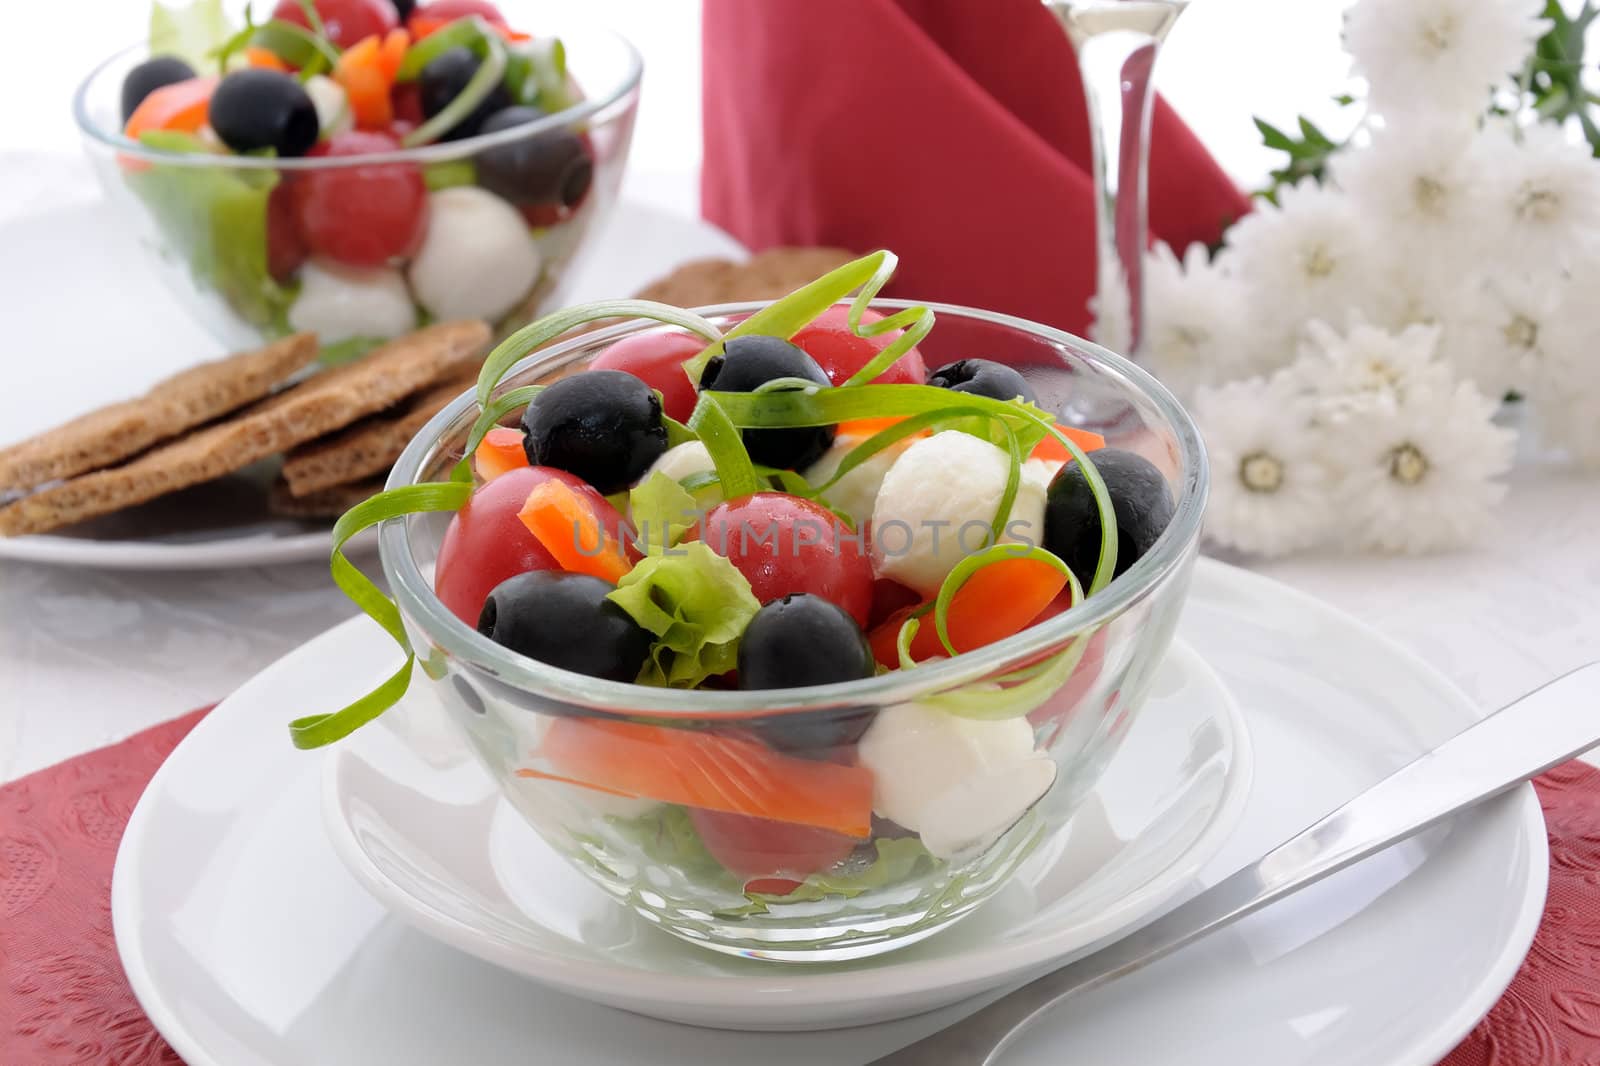 Salad of lettuce, cherry tomatoes, olives and mozzarella with pe by Apolonia